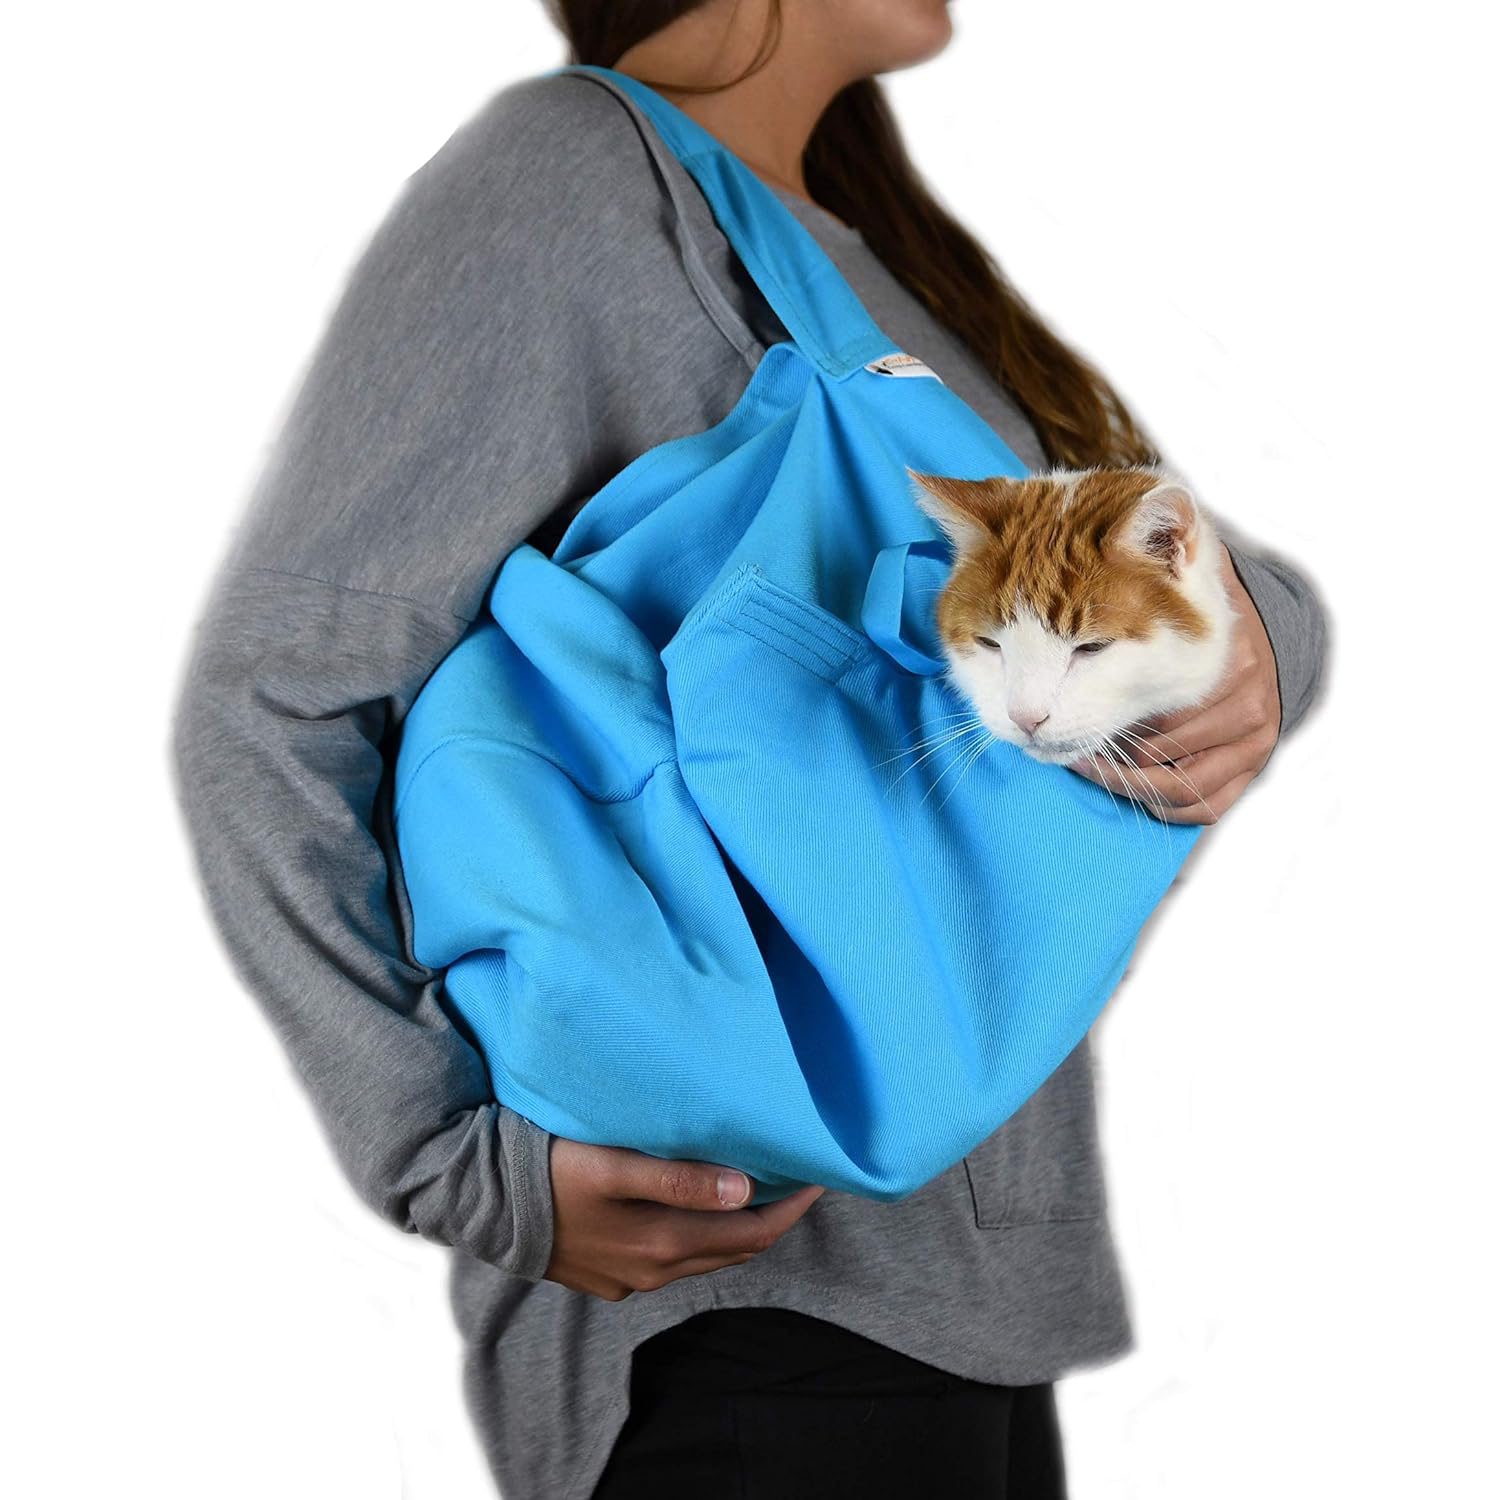 Carrier - Large Light Blue Cat Carrier and Cat Restraint Bag for Medication Administration, Grooming, Vet Visits, Dental Care, and Nail Trimming new